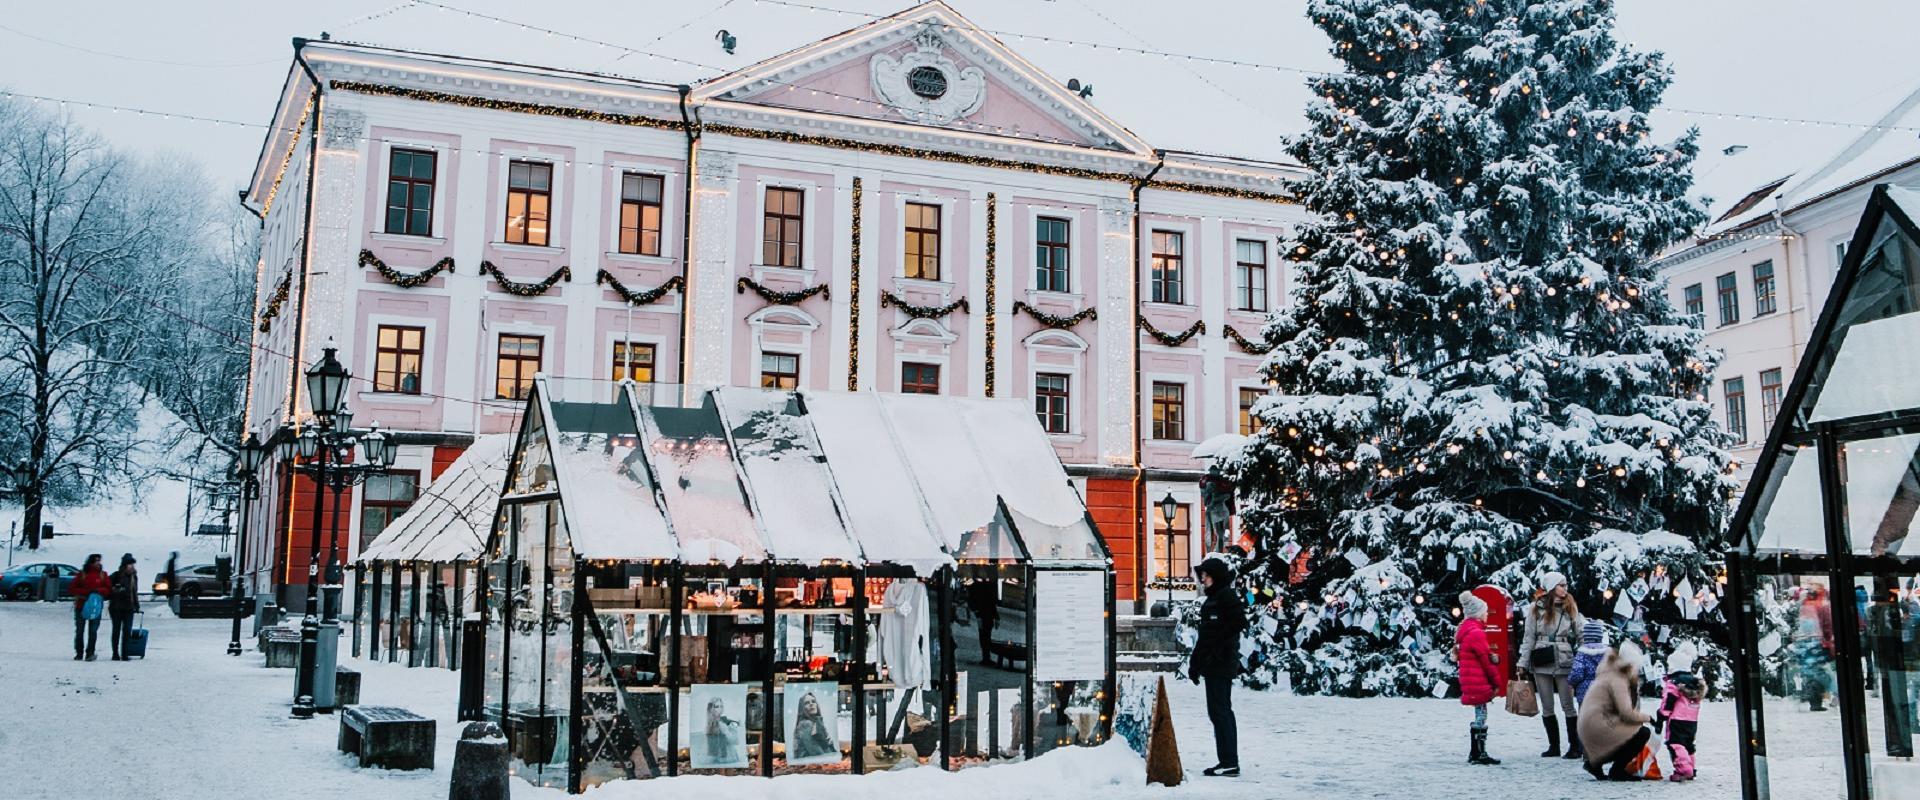 Tartu Town Hall Square and the snowy Christmas Village of Light with an ice rink